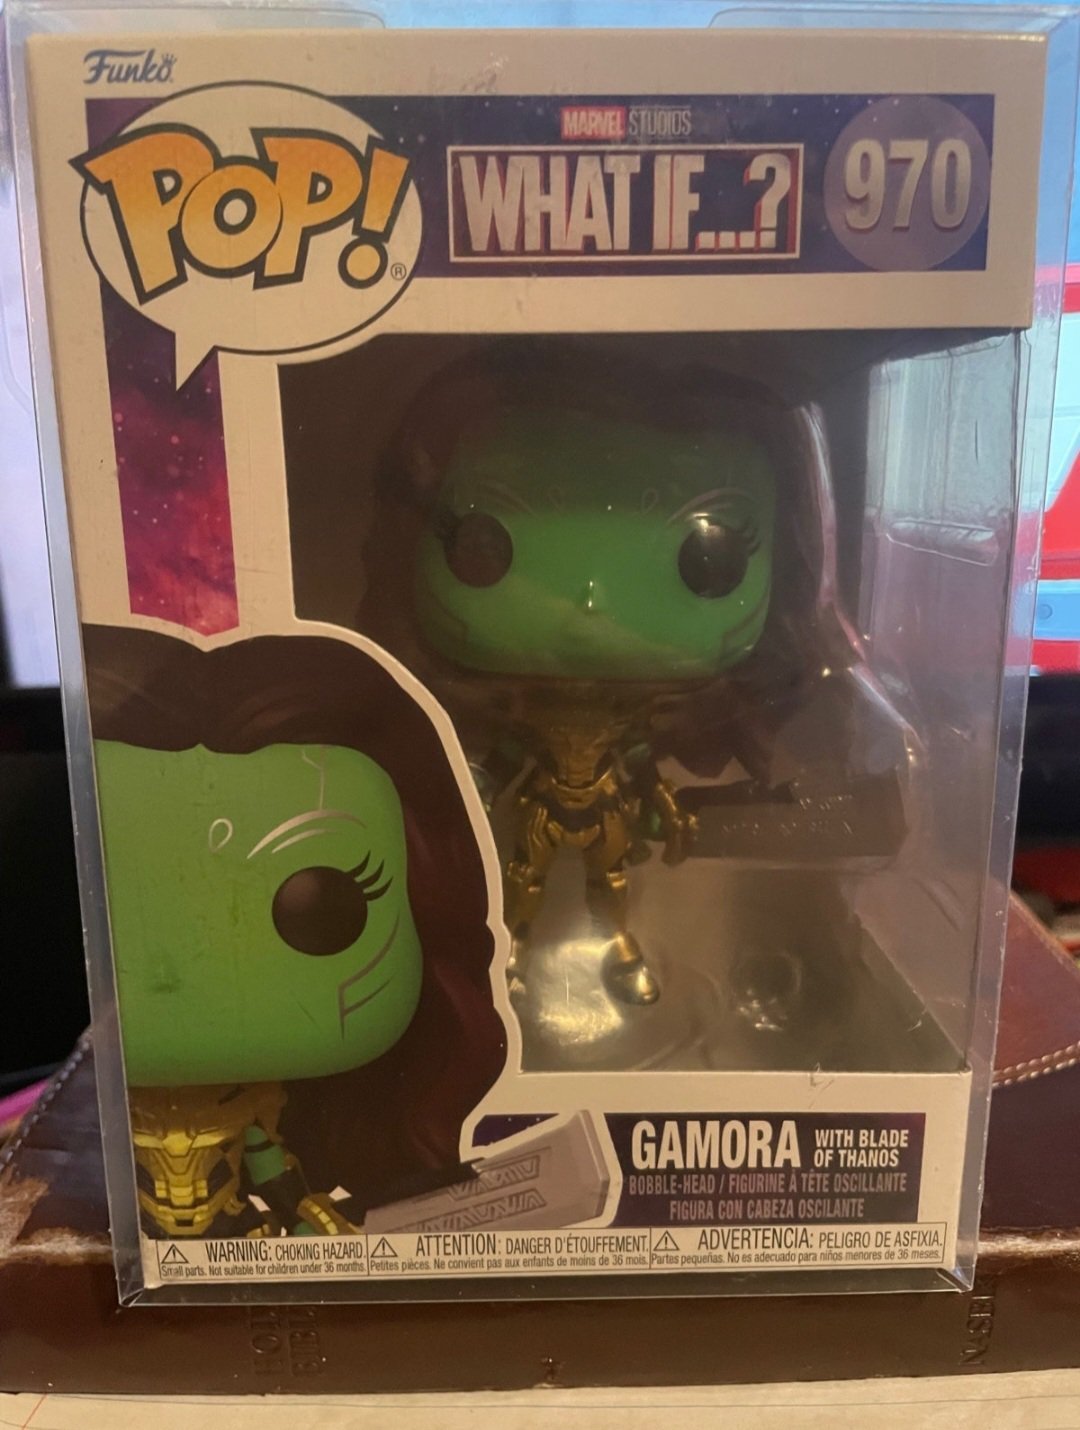 FUNKO POP! Marvel What If? Gamora with Blade of Thanos #970